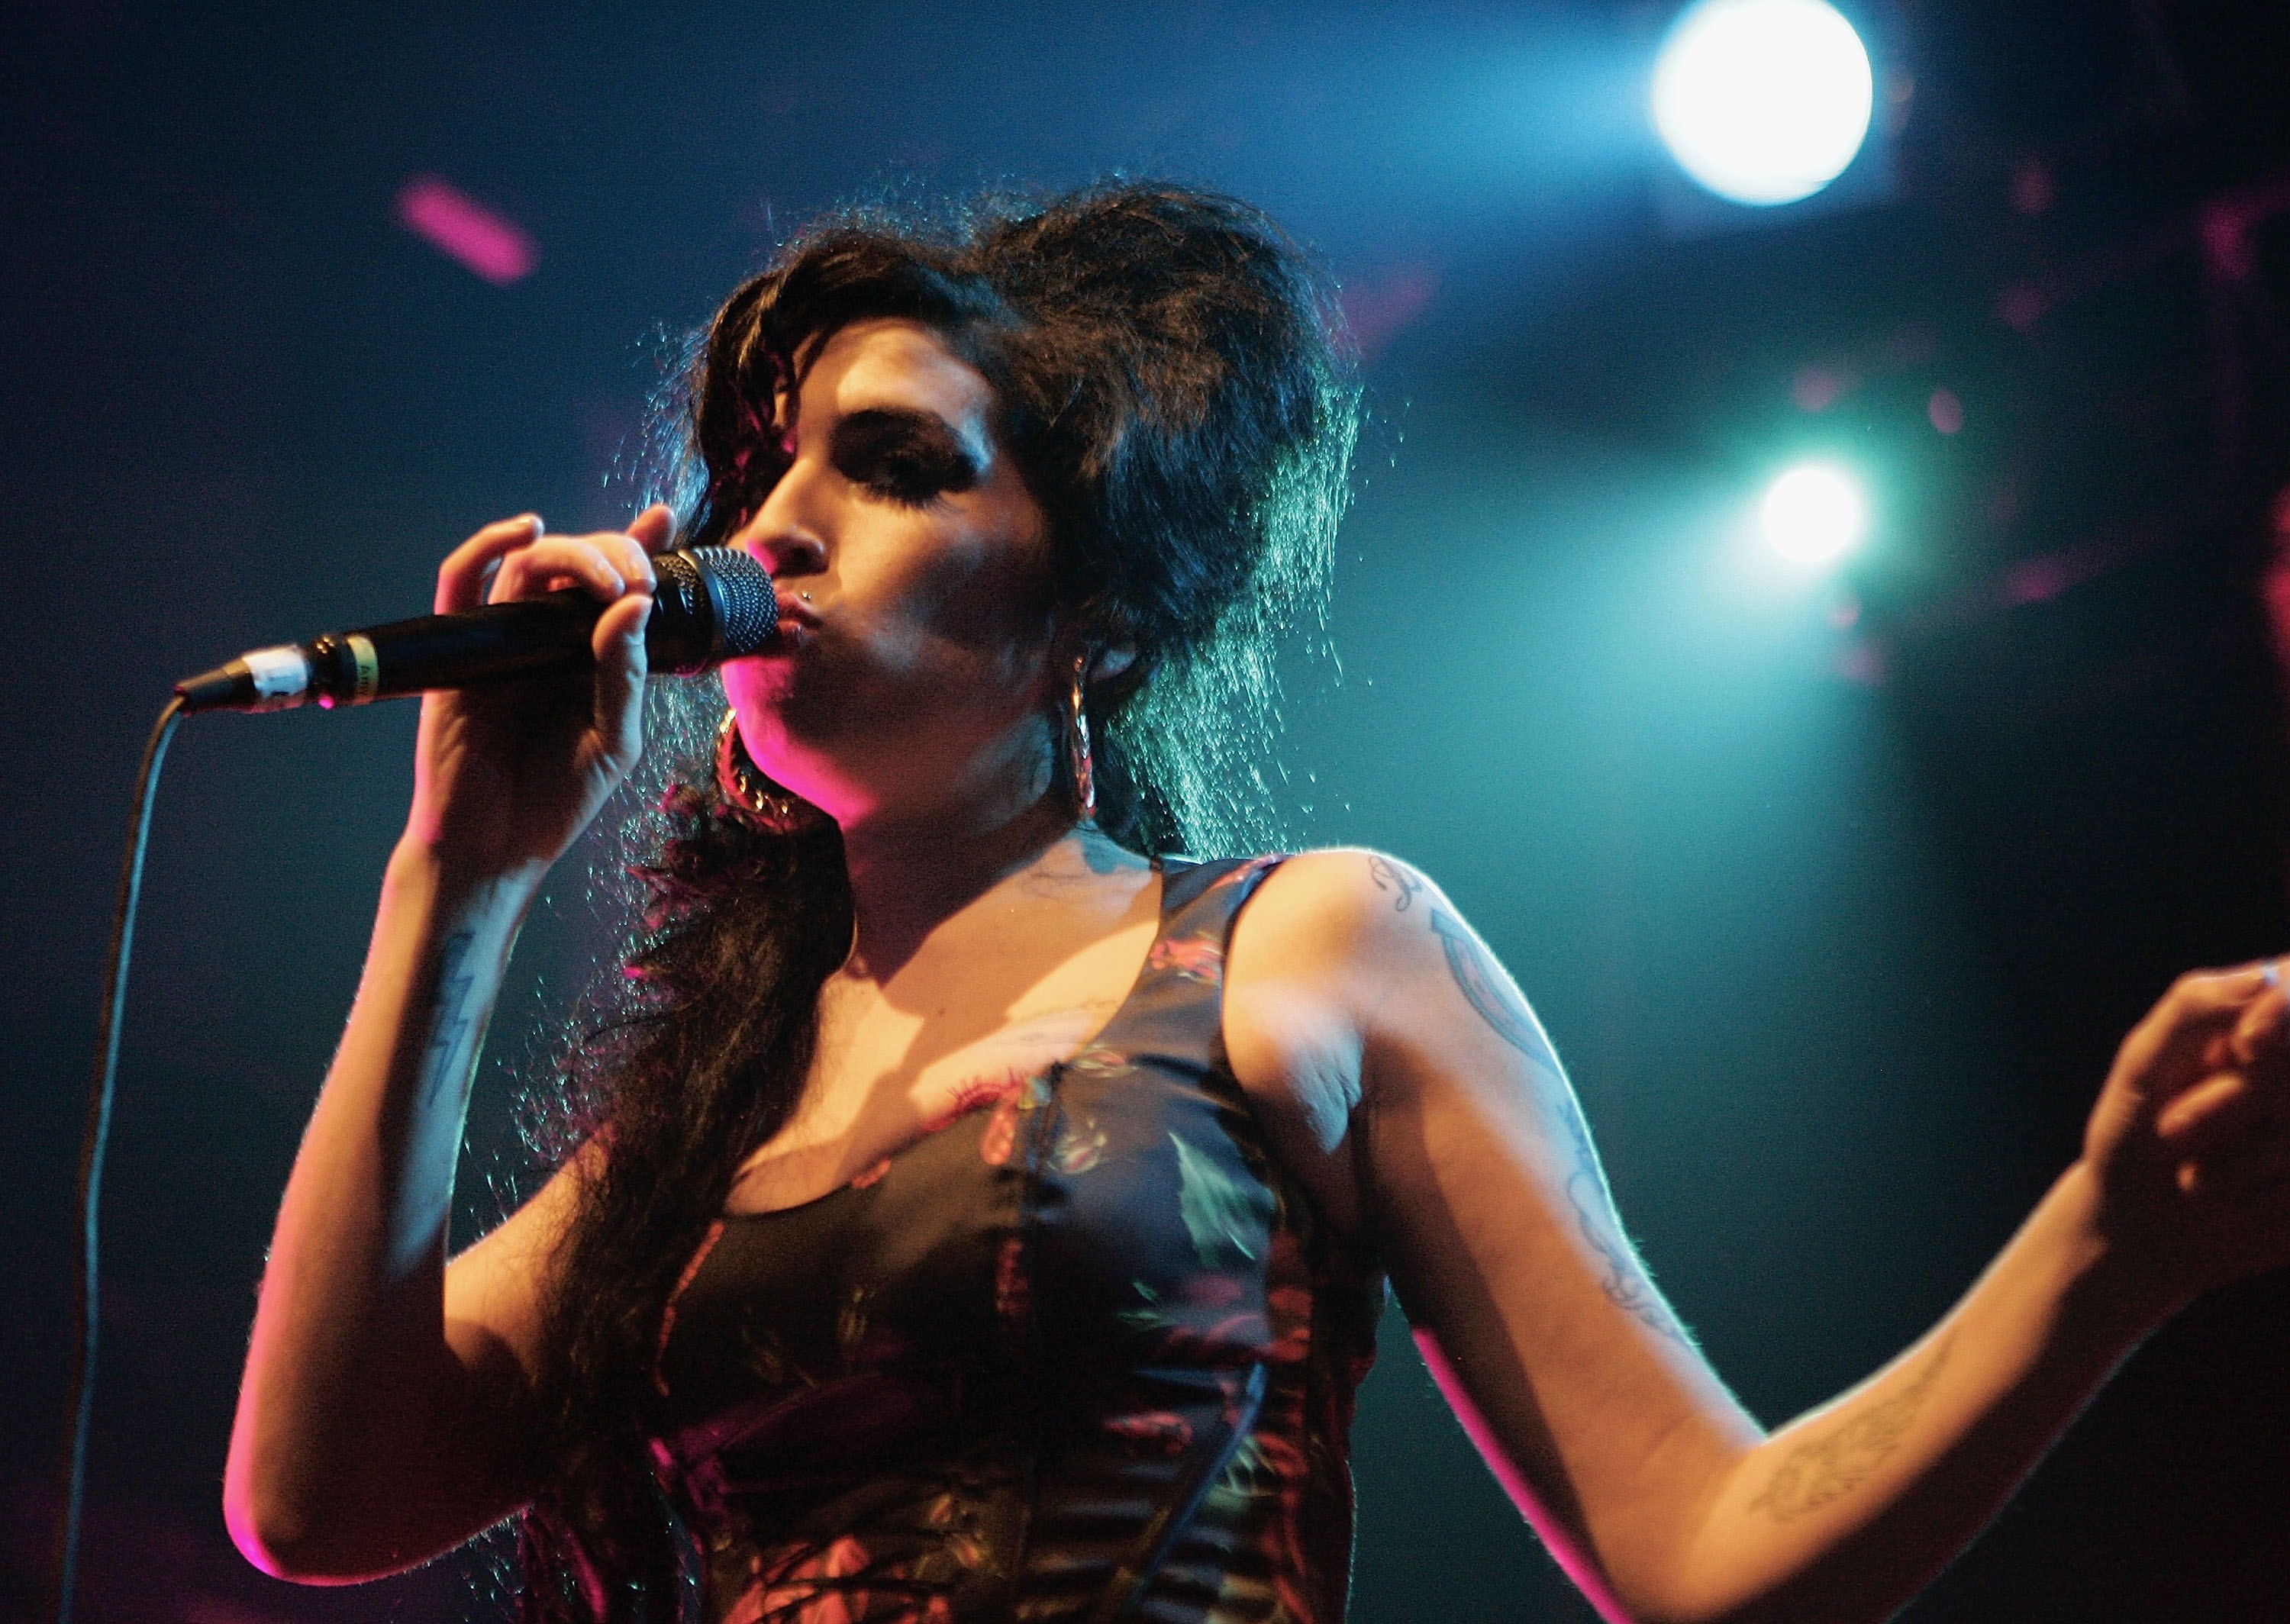 Live Wire Amy Winehouse book coming in August